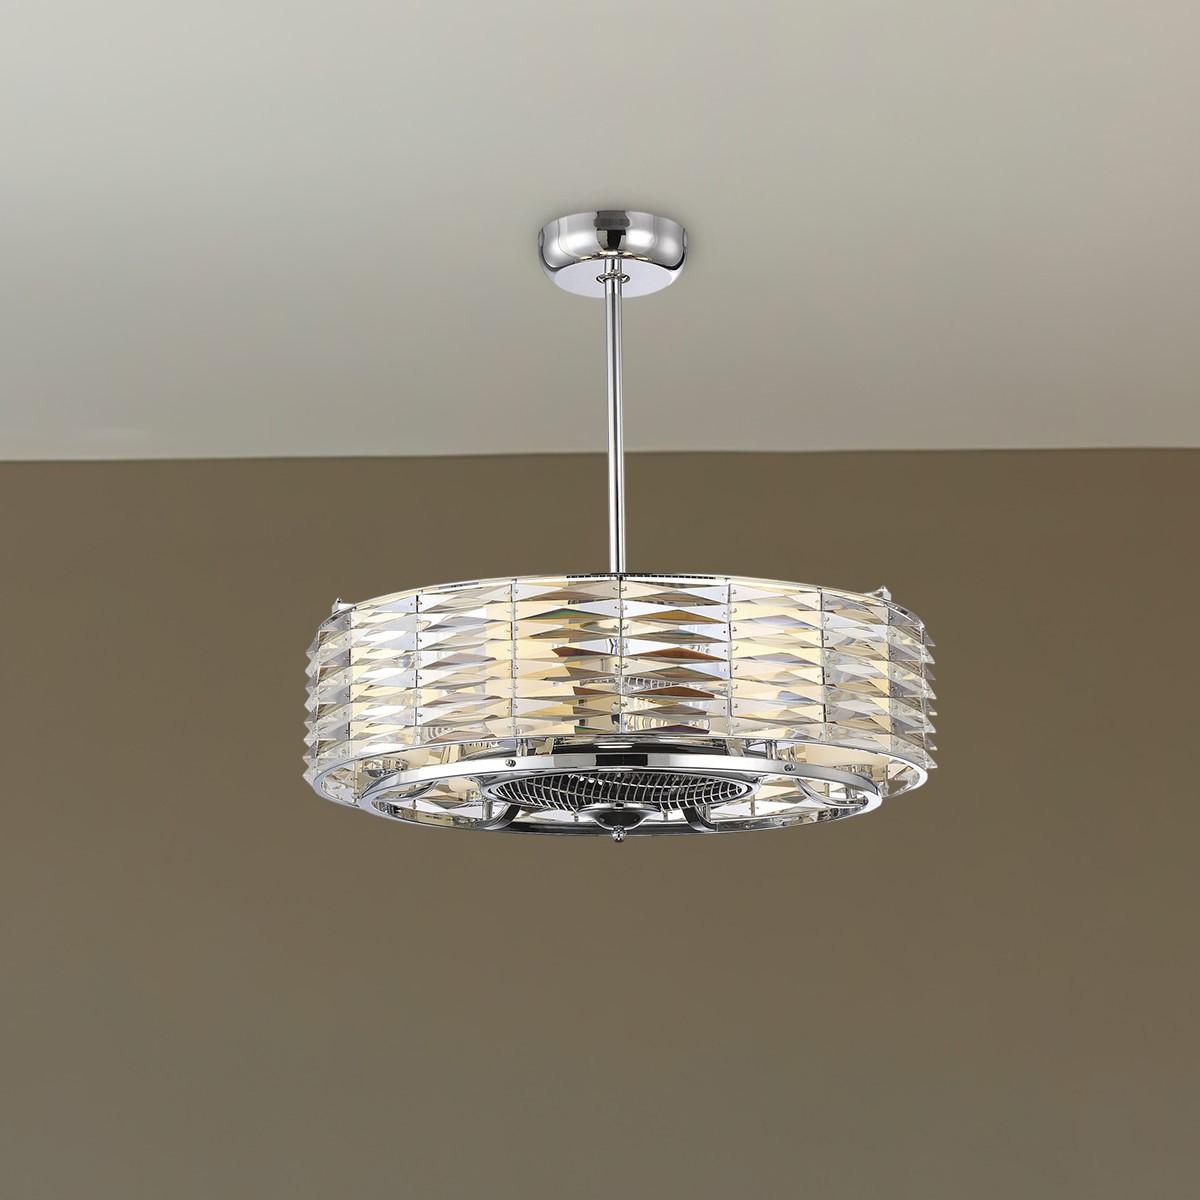 Taurus 30 Inch Chandelier Ceiling Fan With Light And Remote, Polished Chrome Finish